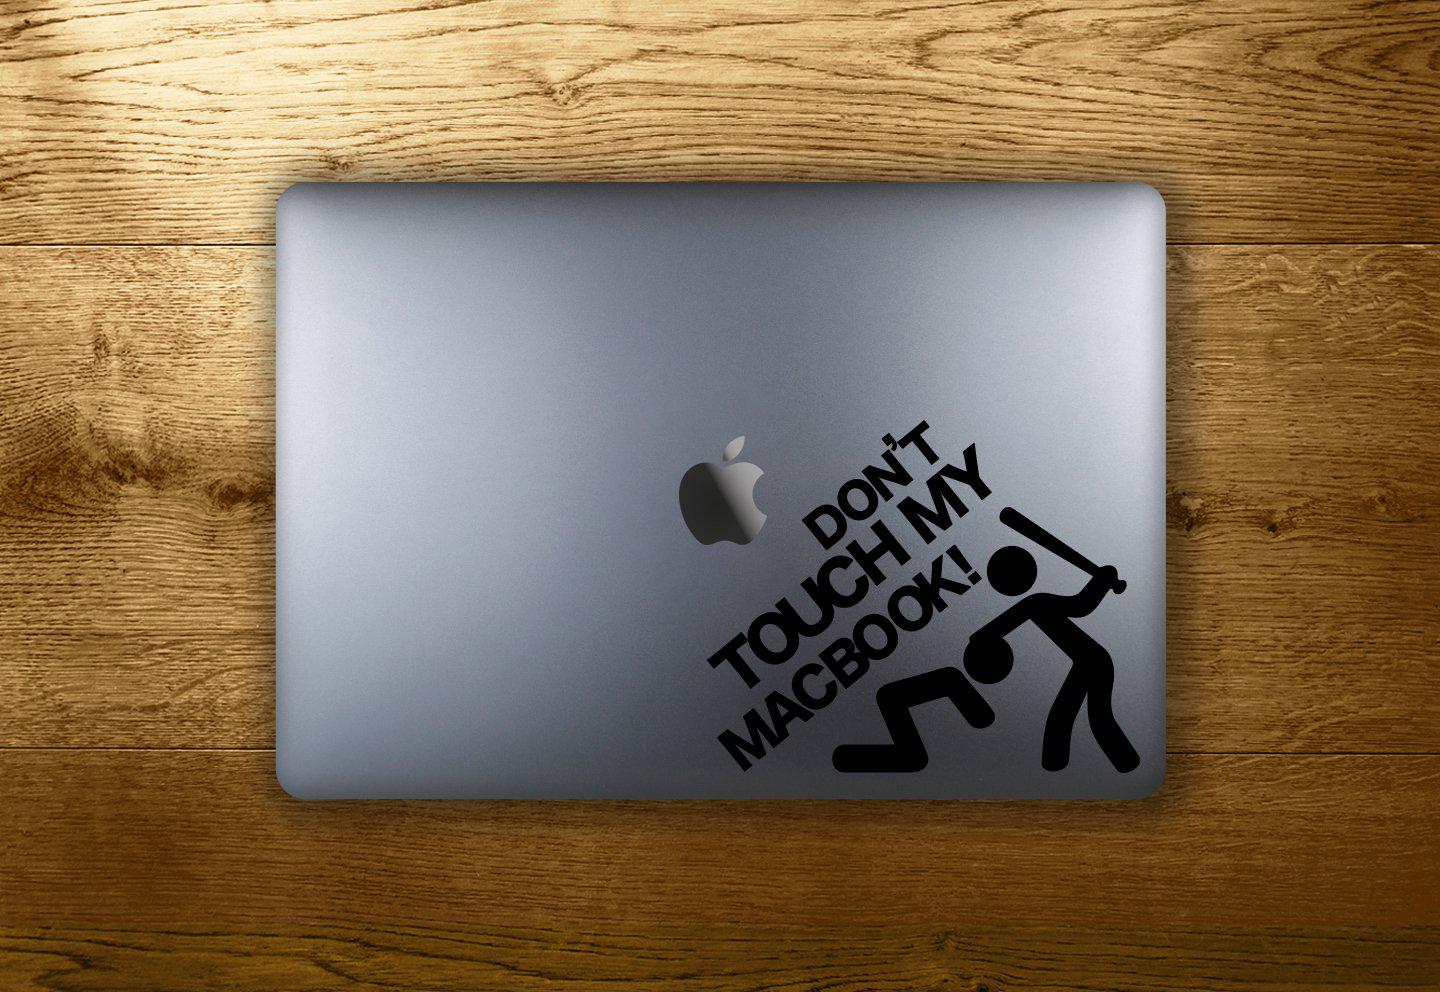 Don't touch my MacBook! - make it stick